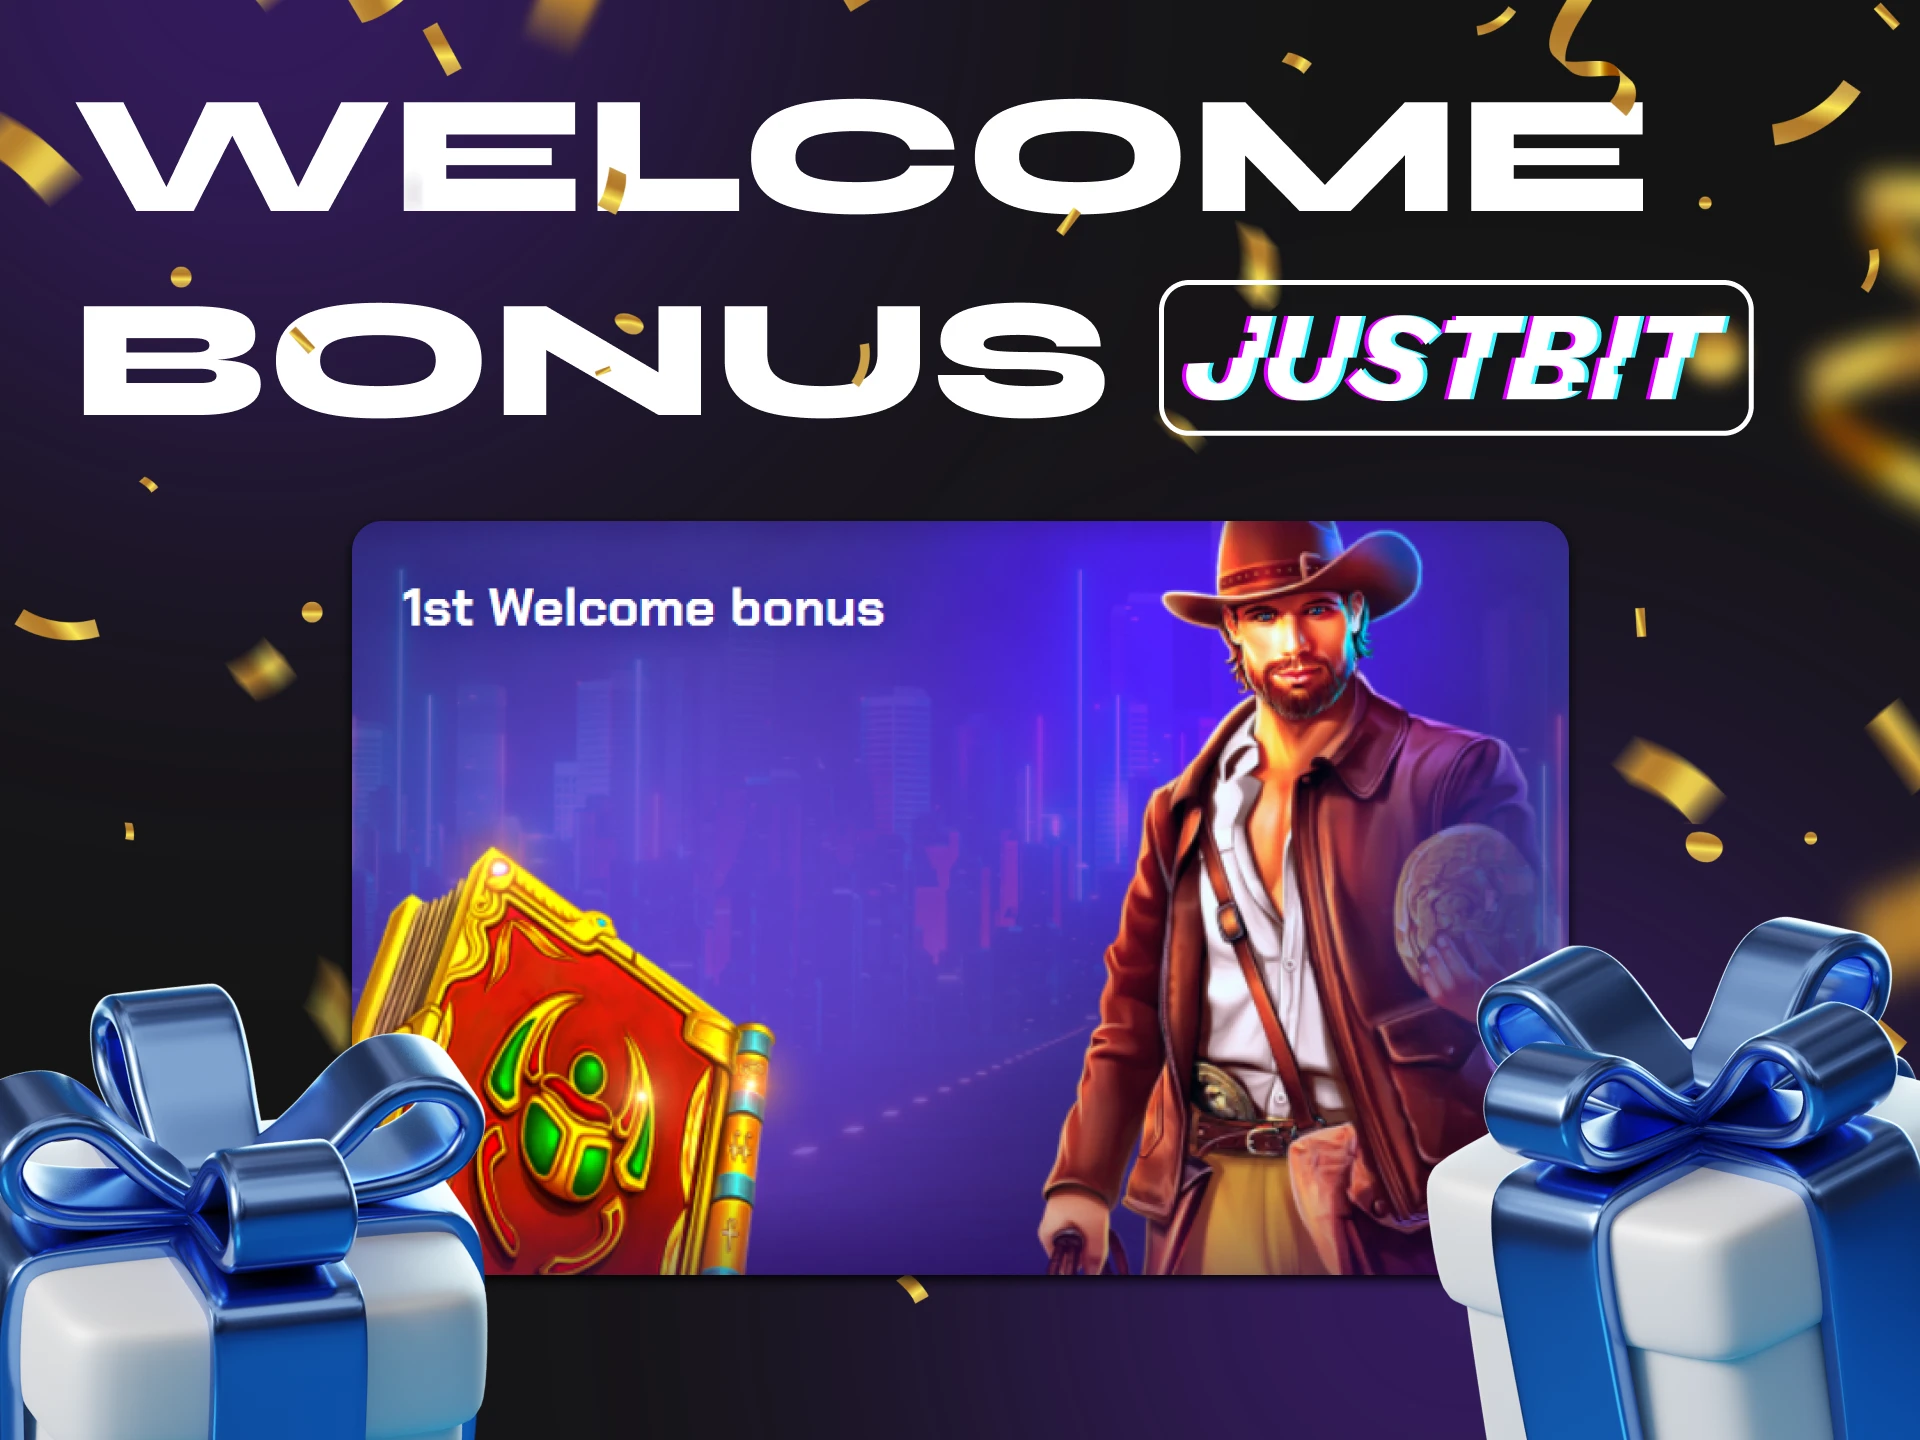 Justbit Casino gives its players a lucrative welcome bonuses for their first few deposits.